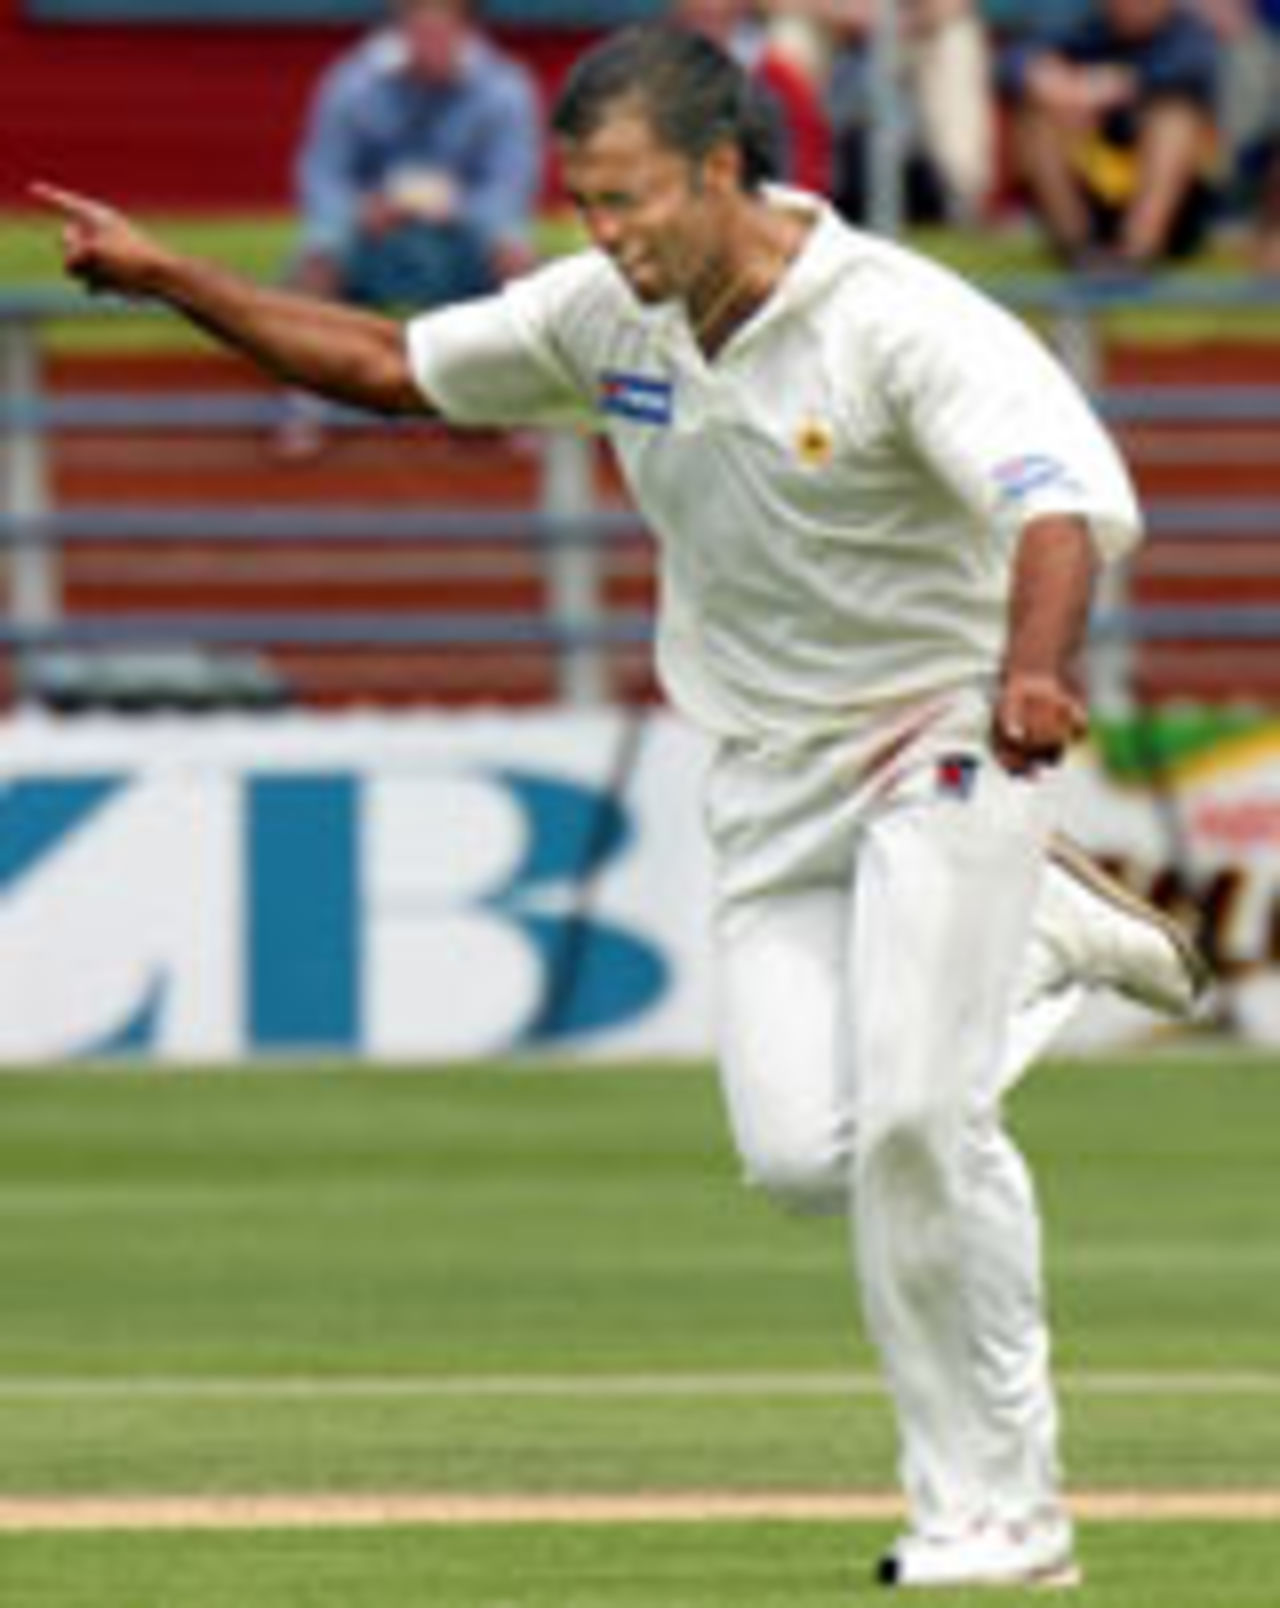 Shoaib Akhtar celebrates after dismissing Robbie Hart for a duck, New Zealand v Pakistan, 2nd Test, Wellington, 4th day, December 29, 2003